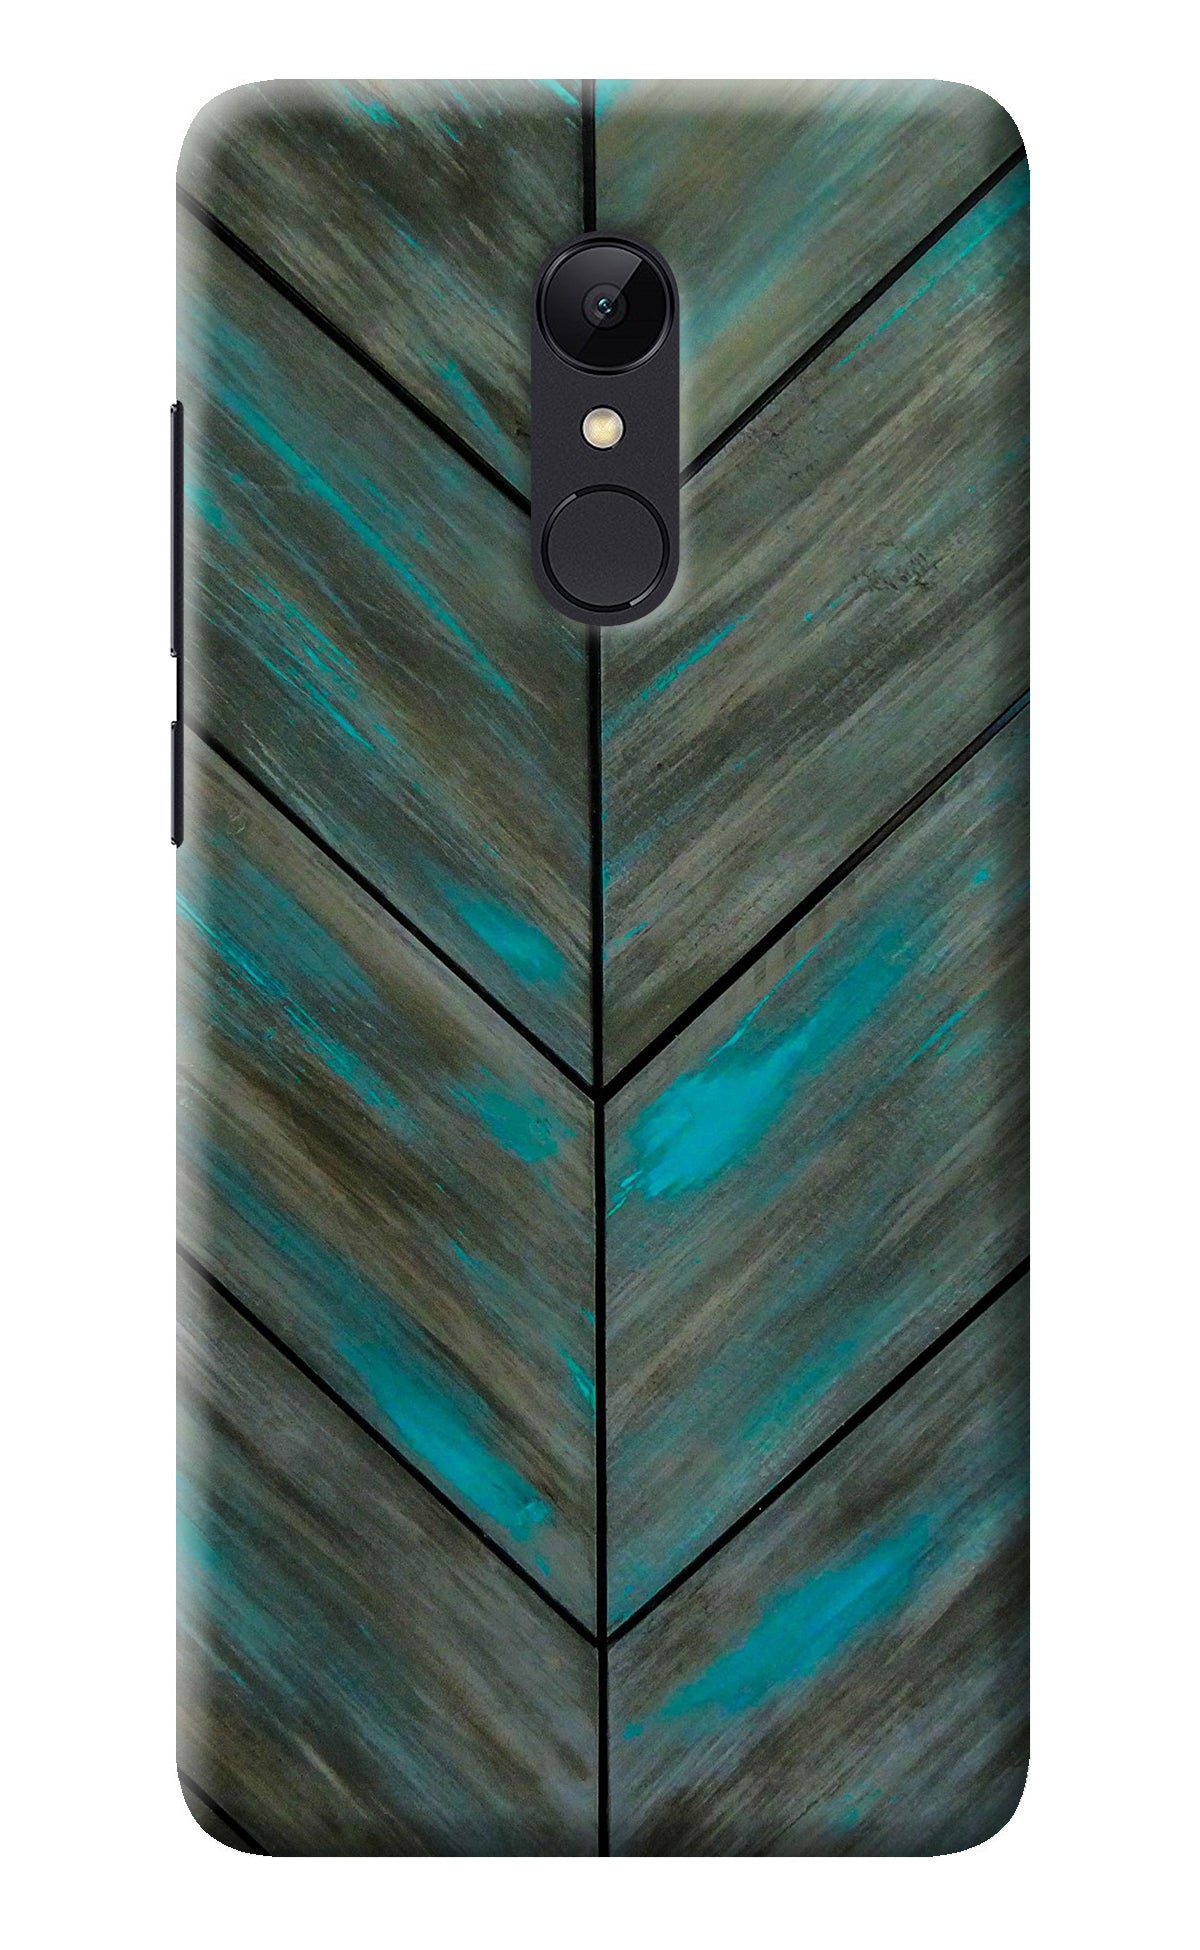 Pattern Redmi Note 4 Back Cover